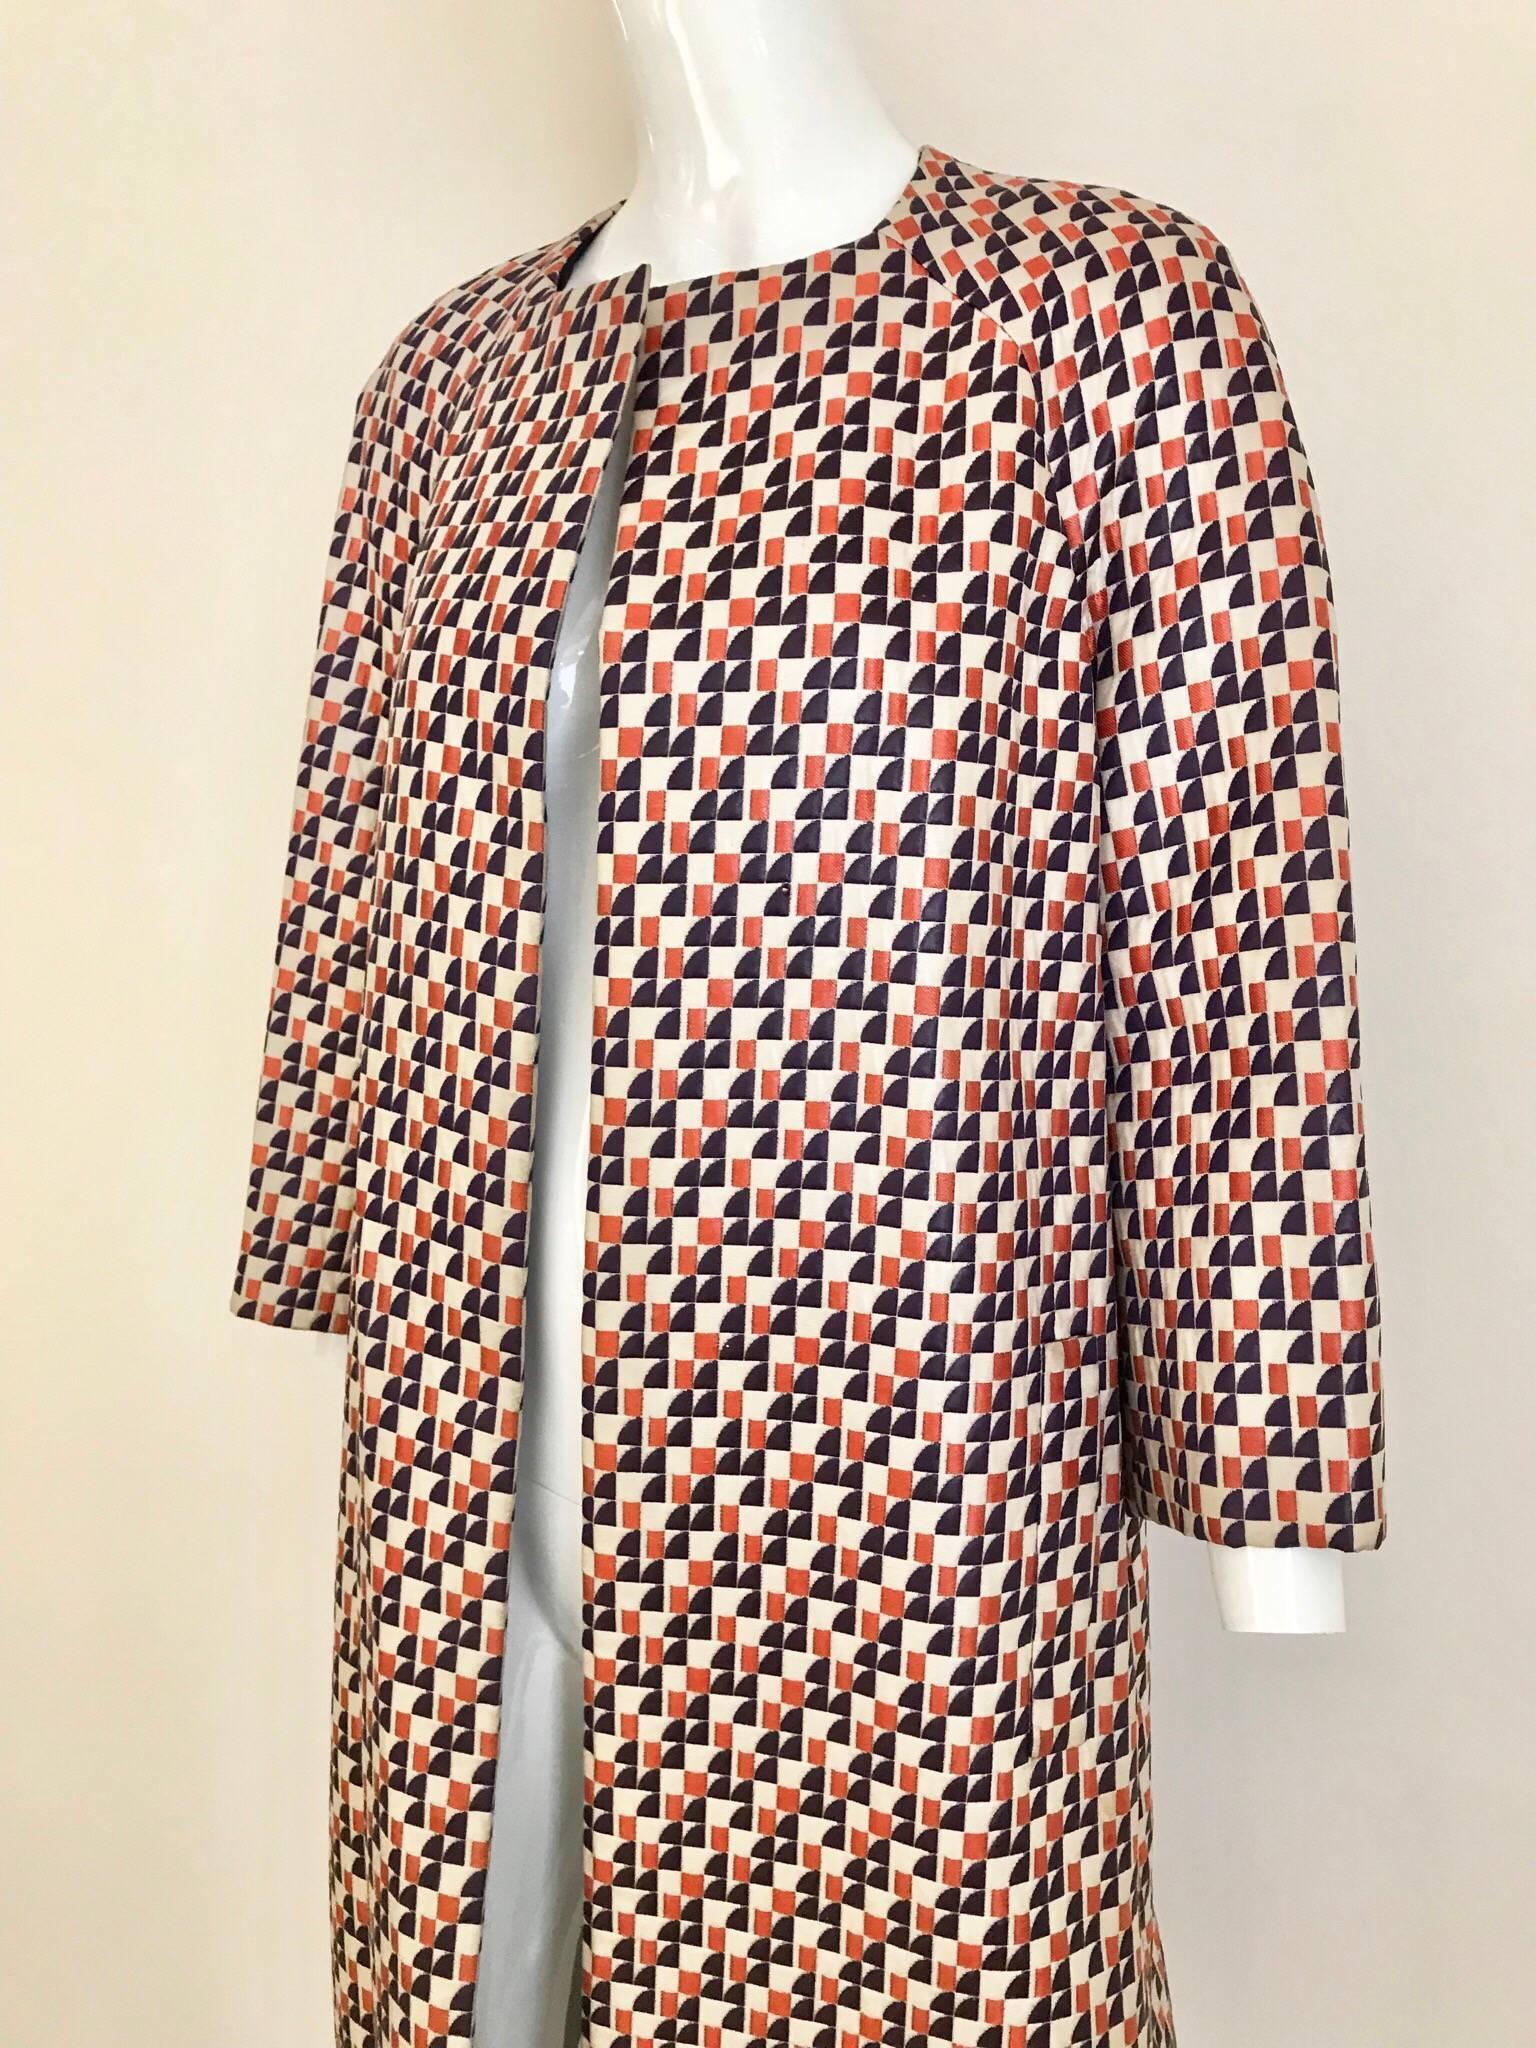 Beautiful multi color woven print coat in orange and purple blue.
Size: MEDIUM- LARGE
BUST: 42 Inches
Coat length: 42 inches/ Sleeve length: 18 inches. Coat is lined with blue silk. 